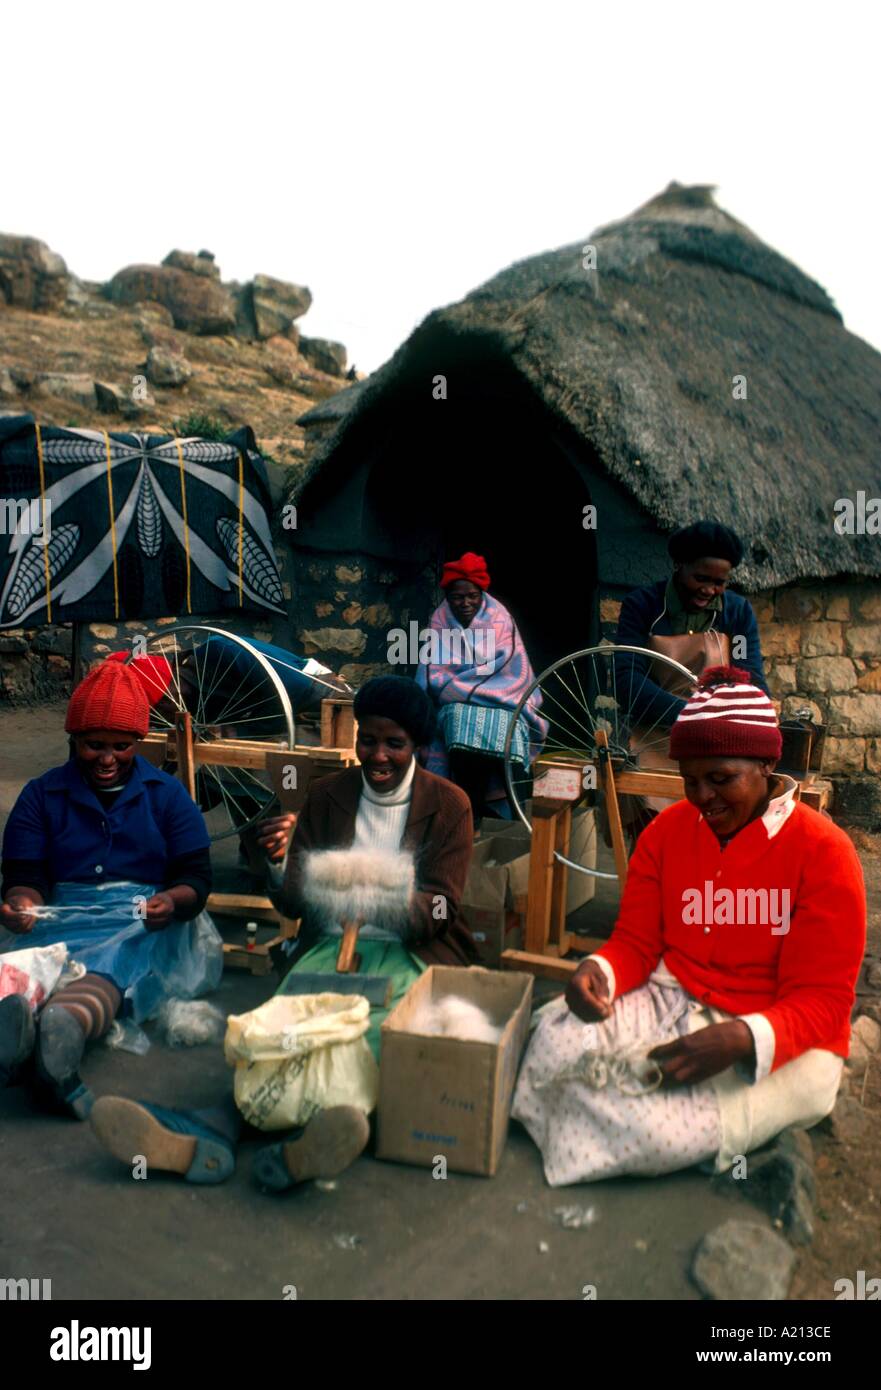 Women mohair spinners Lesotho Africa R Cundy Stock Photo